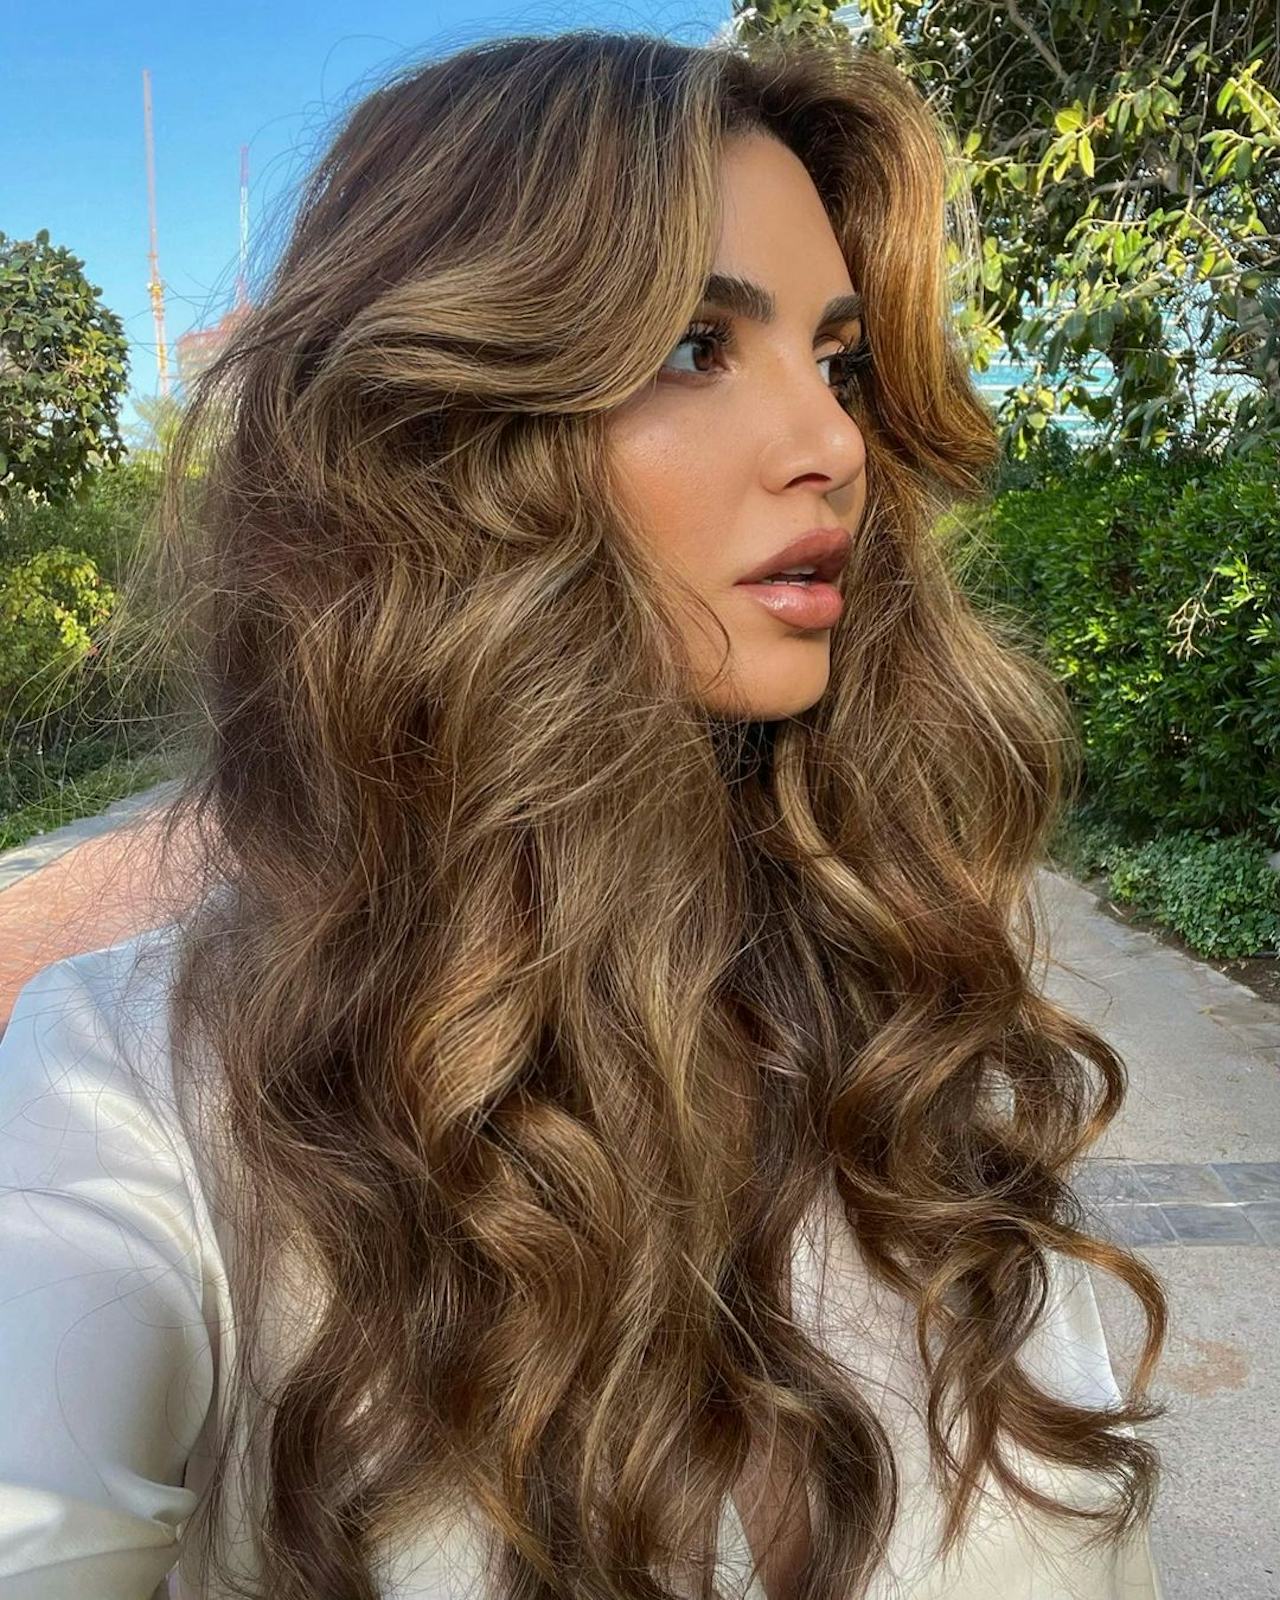 Balayage Highlights On Curly Hair Is The Quintessential Summer Look